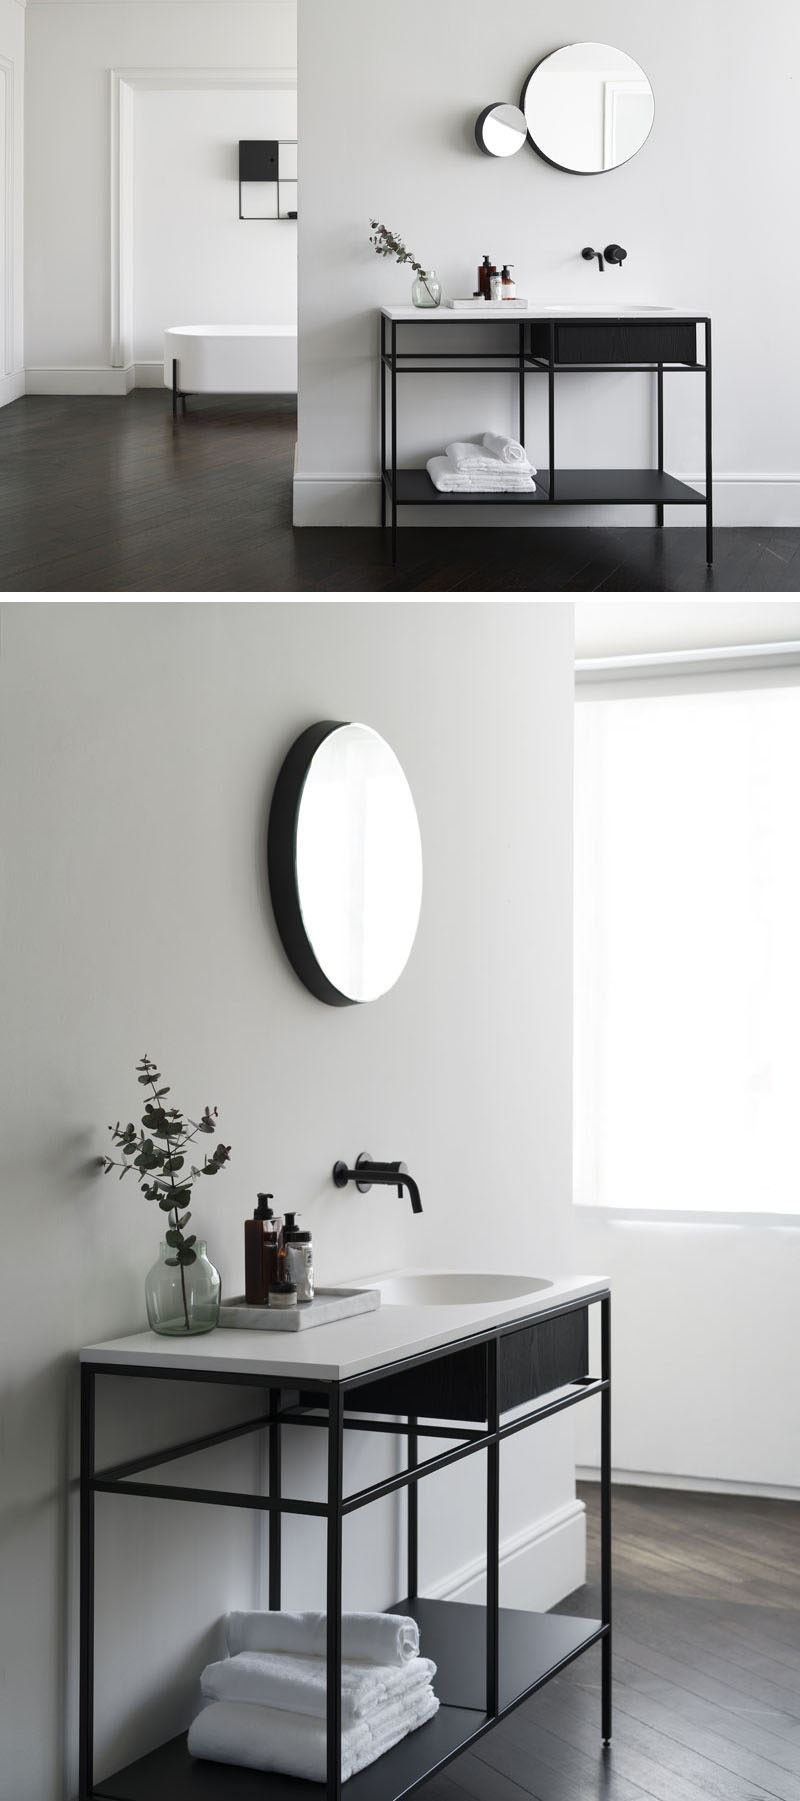 Norm Architects have designed a collection of modular minimalist bathroom consoles that feature black graphic frames, marble and wood.